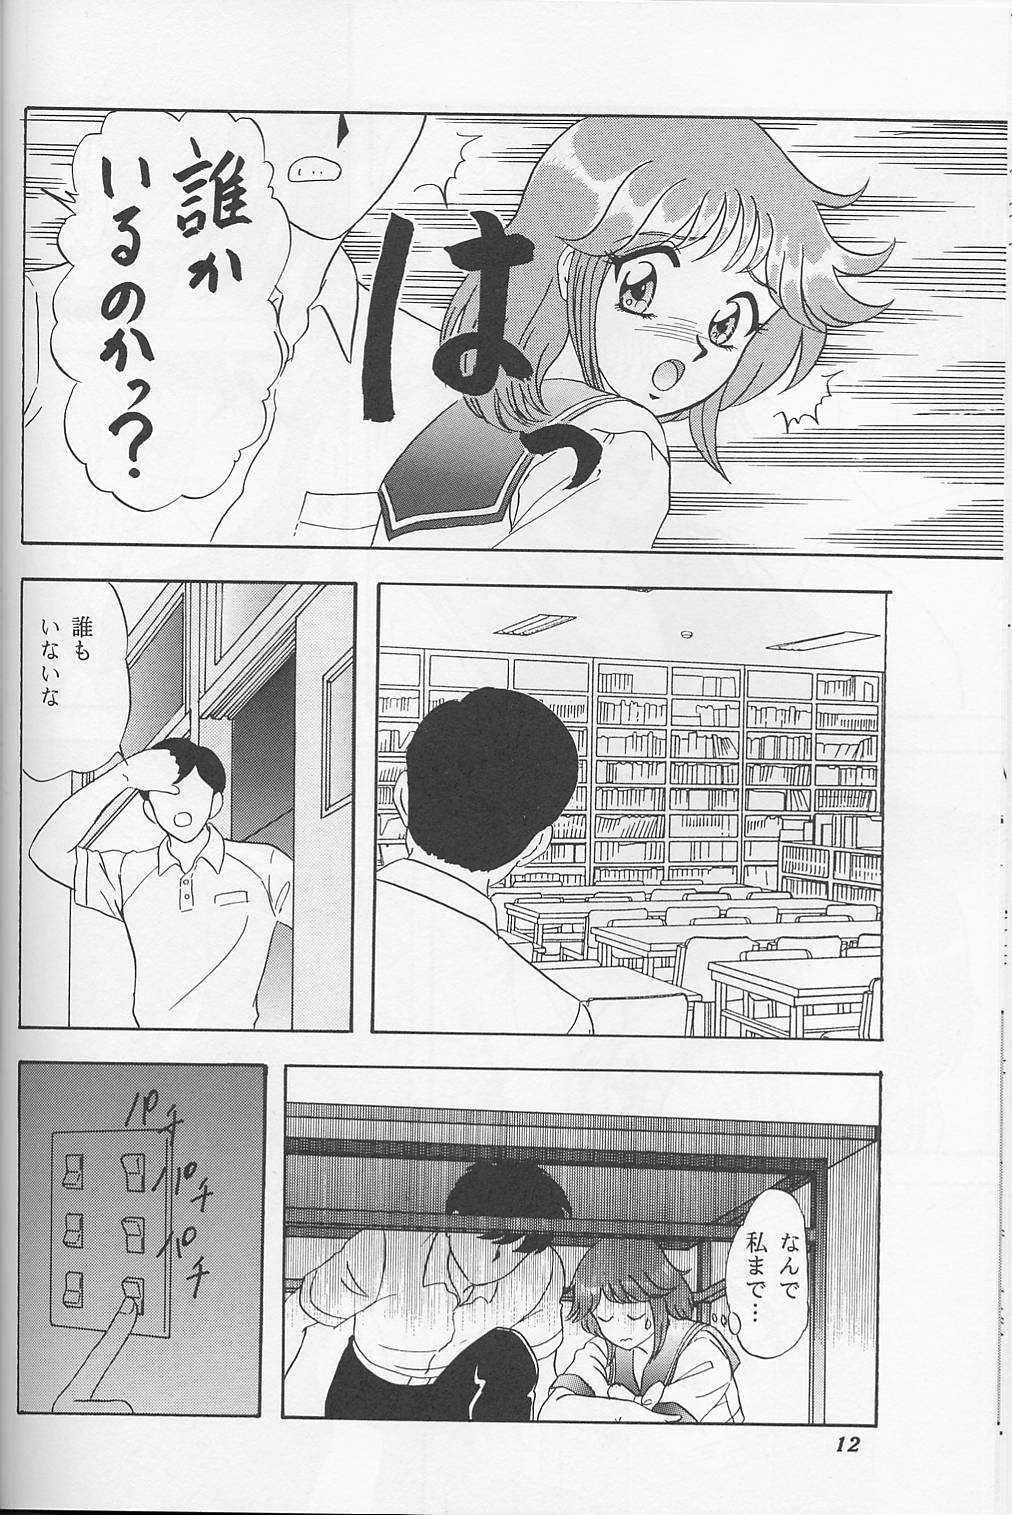 Boots Lunch Time 7 - Tokimeki memorial Gay Pissing - Page 11